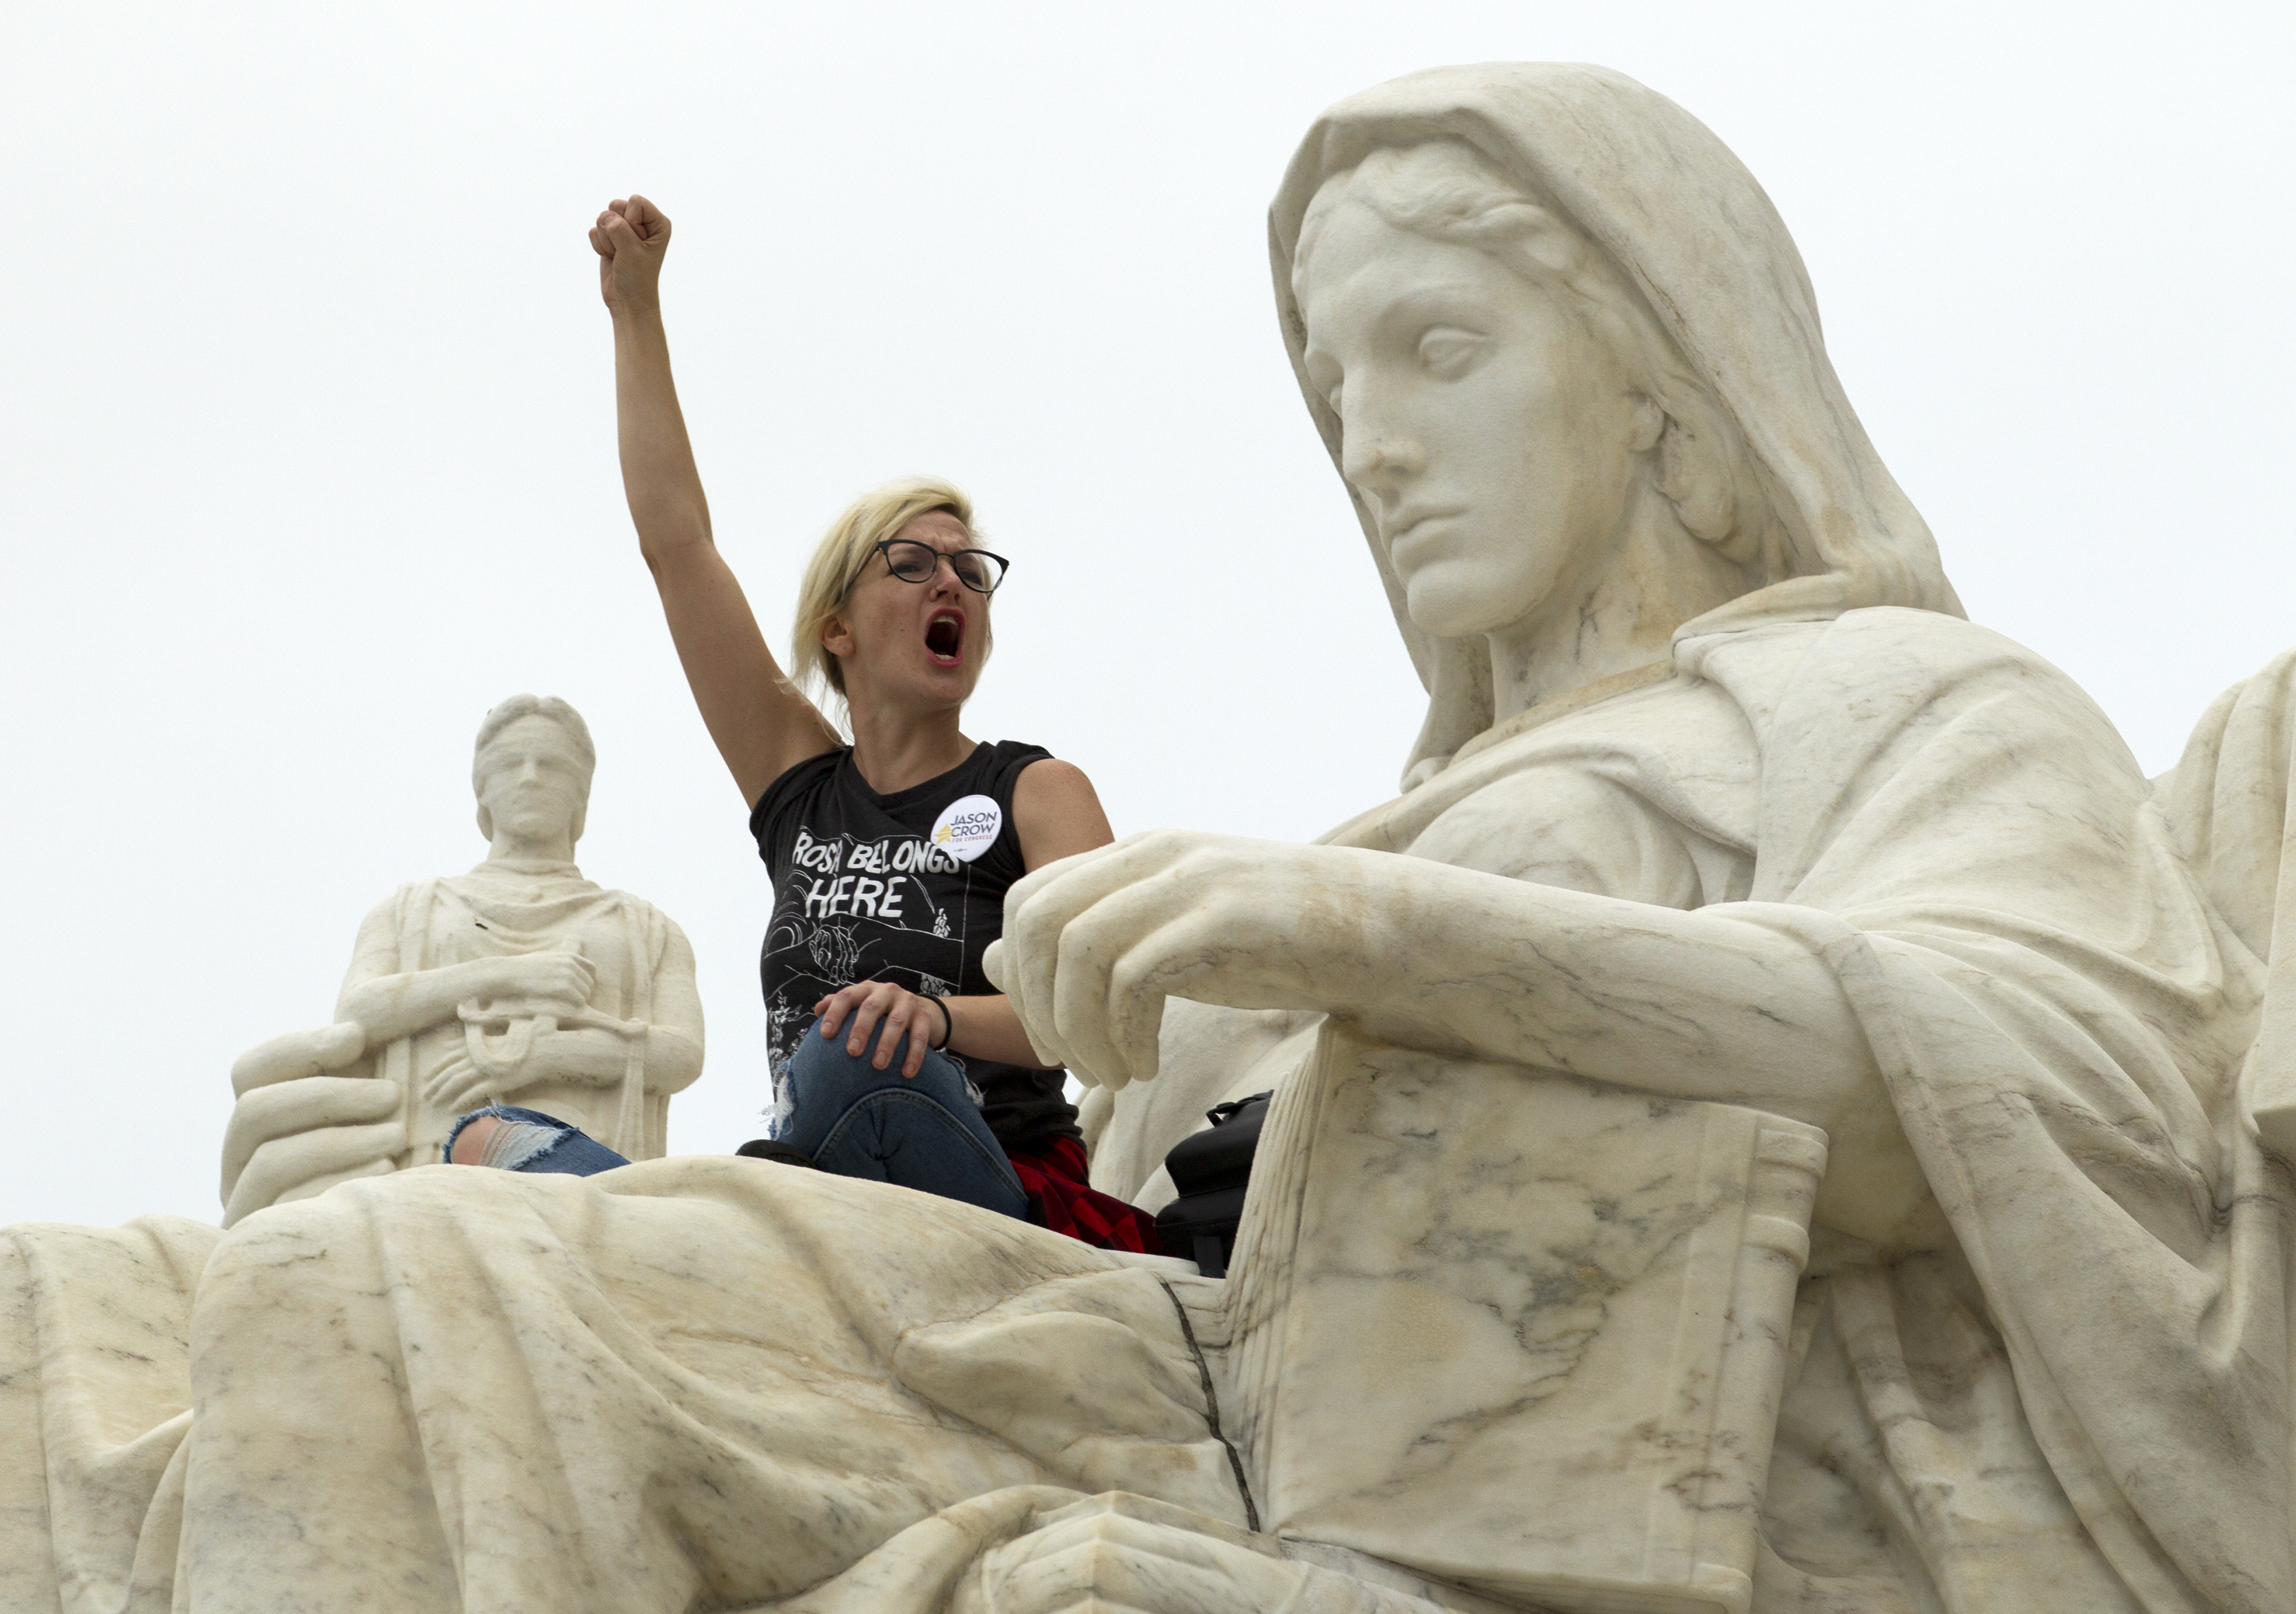 Demonstrator Jessica Campbell-Swanson of Denver stands on the "Contemplation of Justice" statue as protestors take the steps of the Supreme Court to picket against the confirmation of Justice Brett Kavanaugh on October 6, 2018. (Jose Luis Magana/AFP/Getty Images)